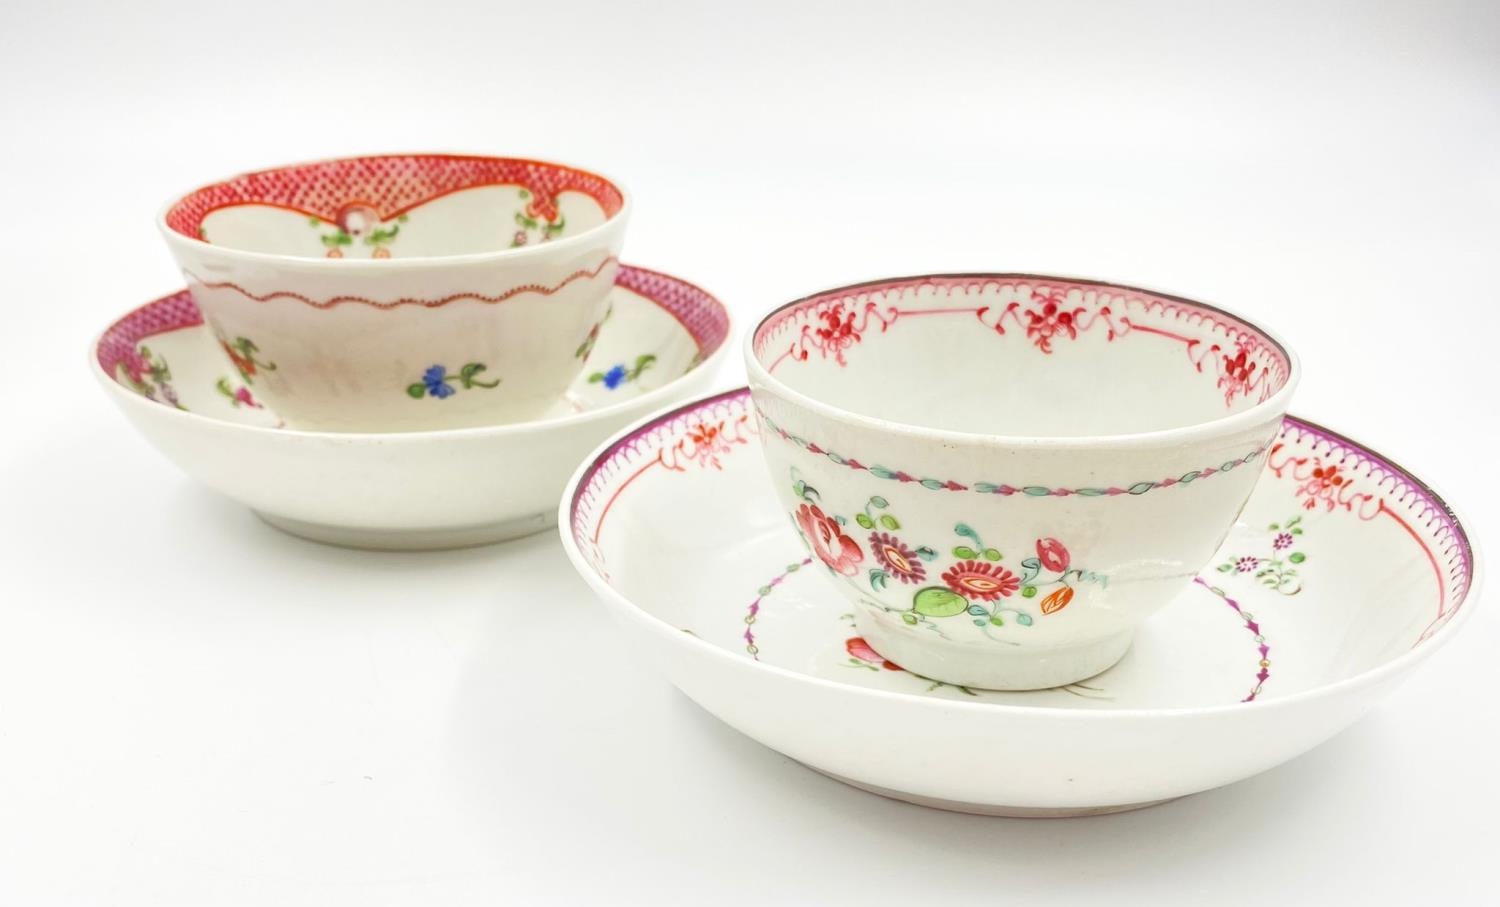 Two Antique New Hall Floral Tea bowls and Saucers. Pattern 173, circa 1790 and Pattern 353, circa - Image 5 of 10